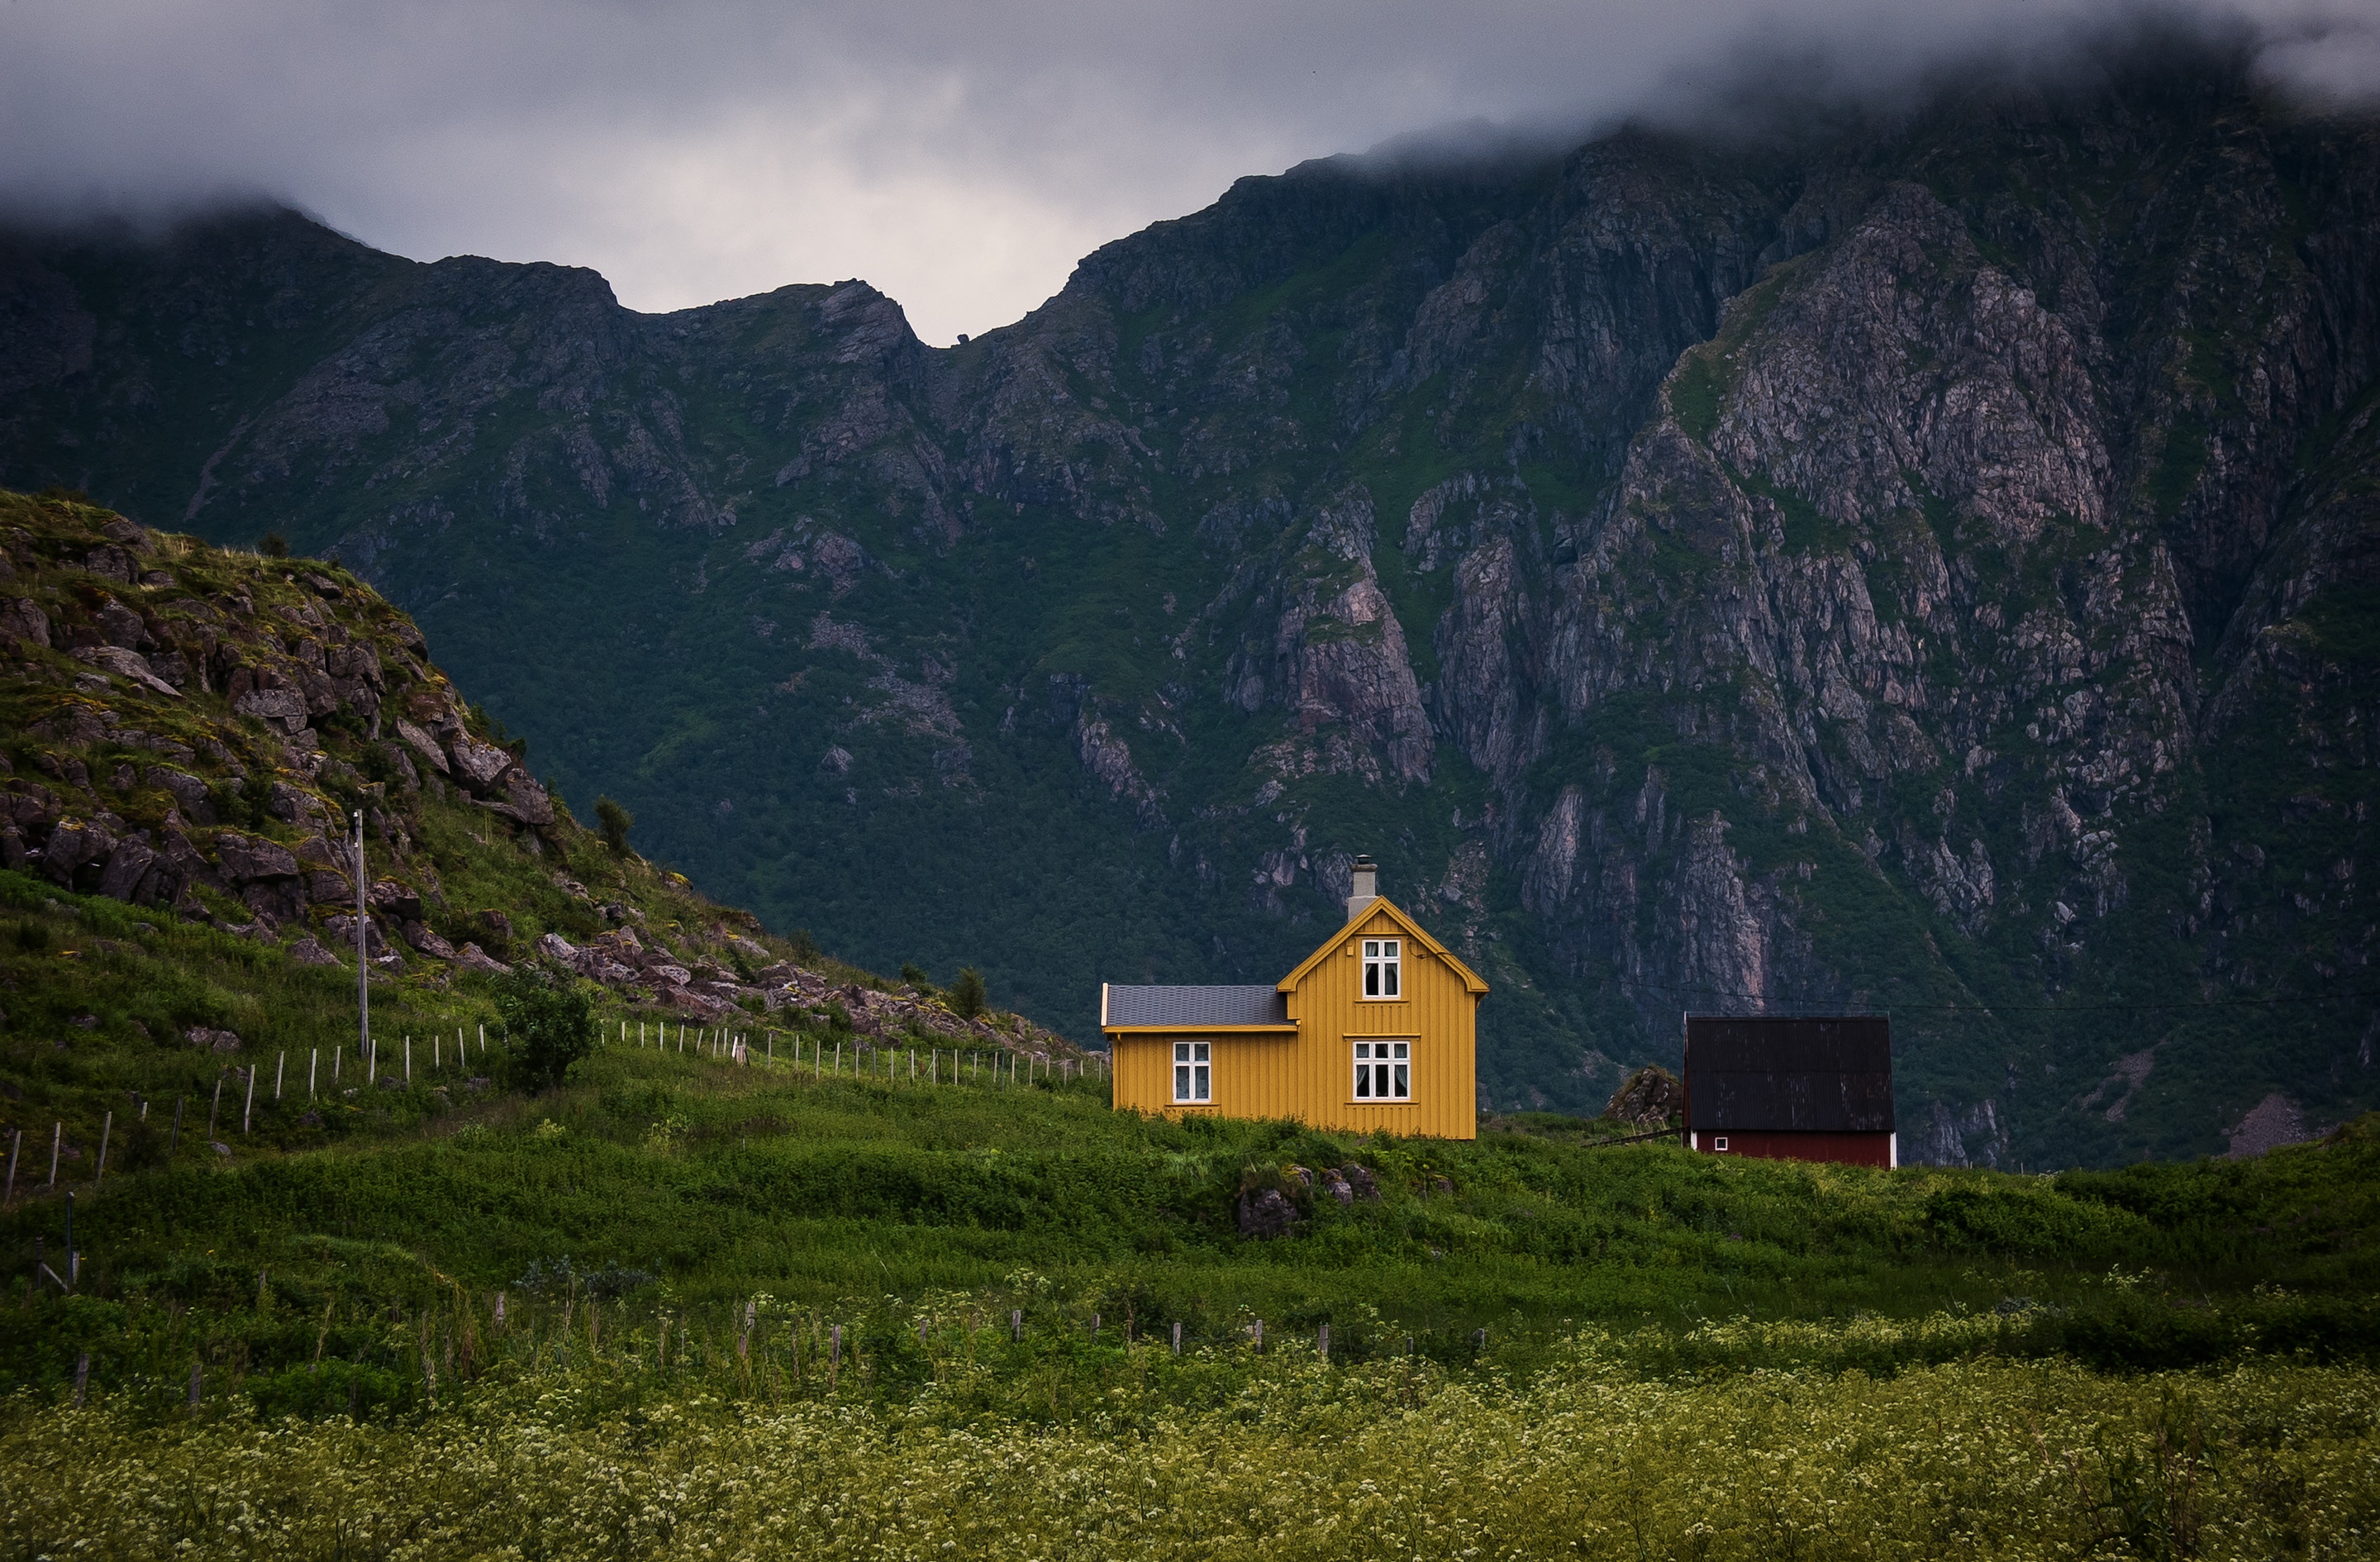 seclusion, small house, nature, grass, mountains, clouds, privacy, lodge